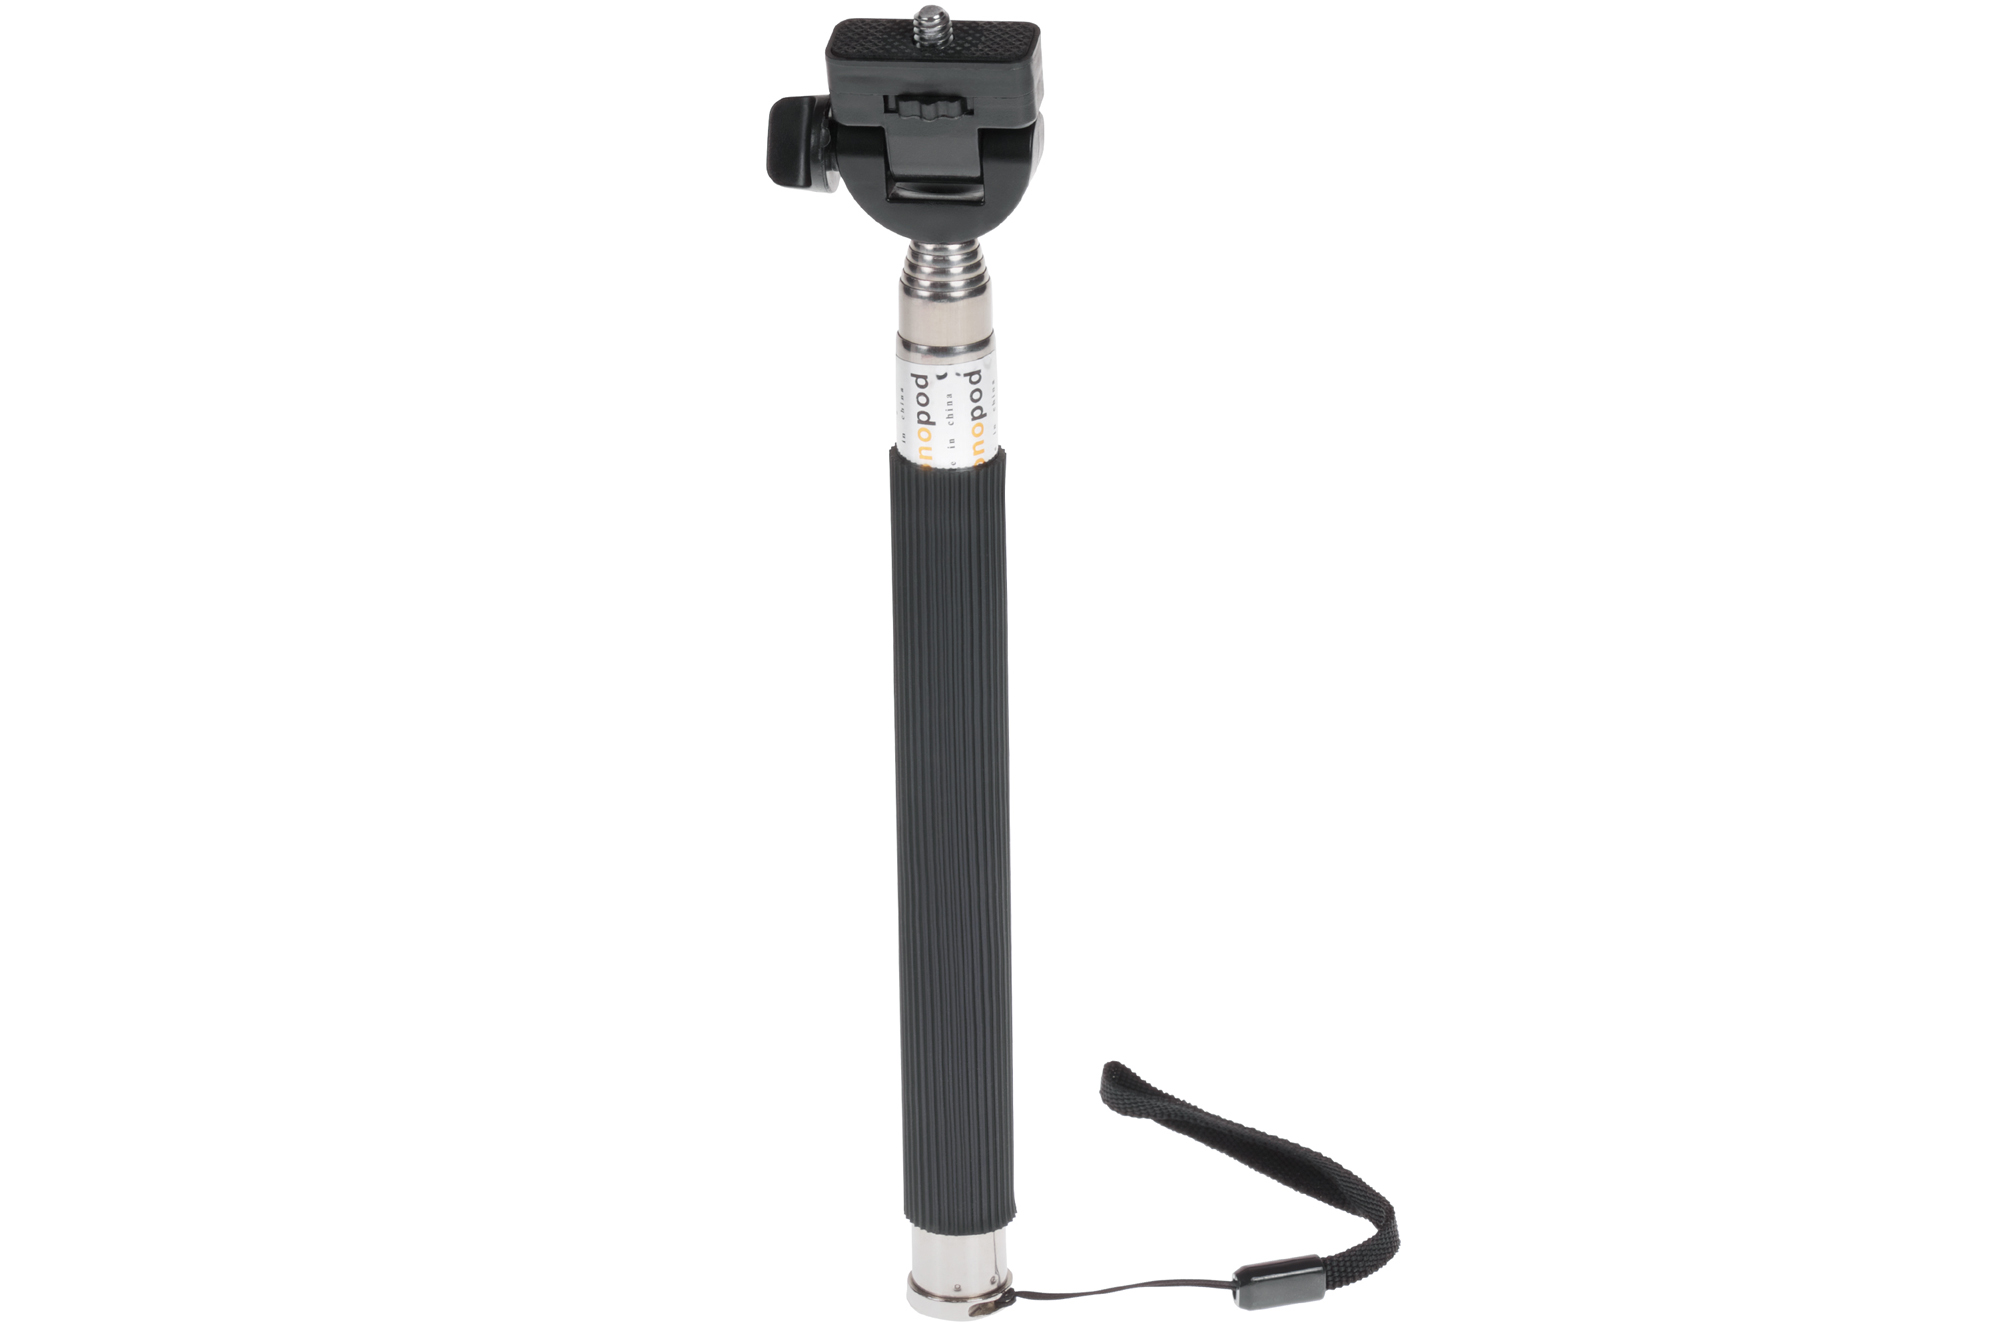 Photos - Other for Computer Panasonic MONOPOD Z07-1 Hand Held Compact Camera Selfie Stick - Black 